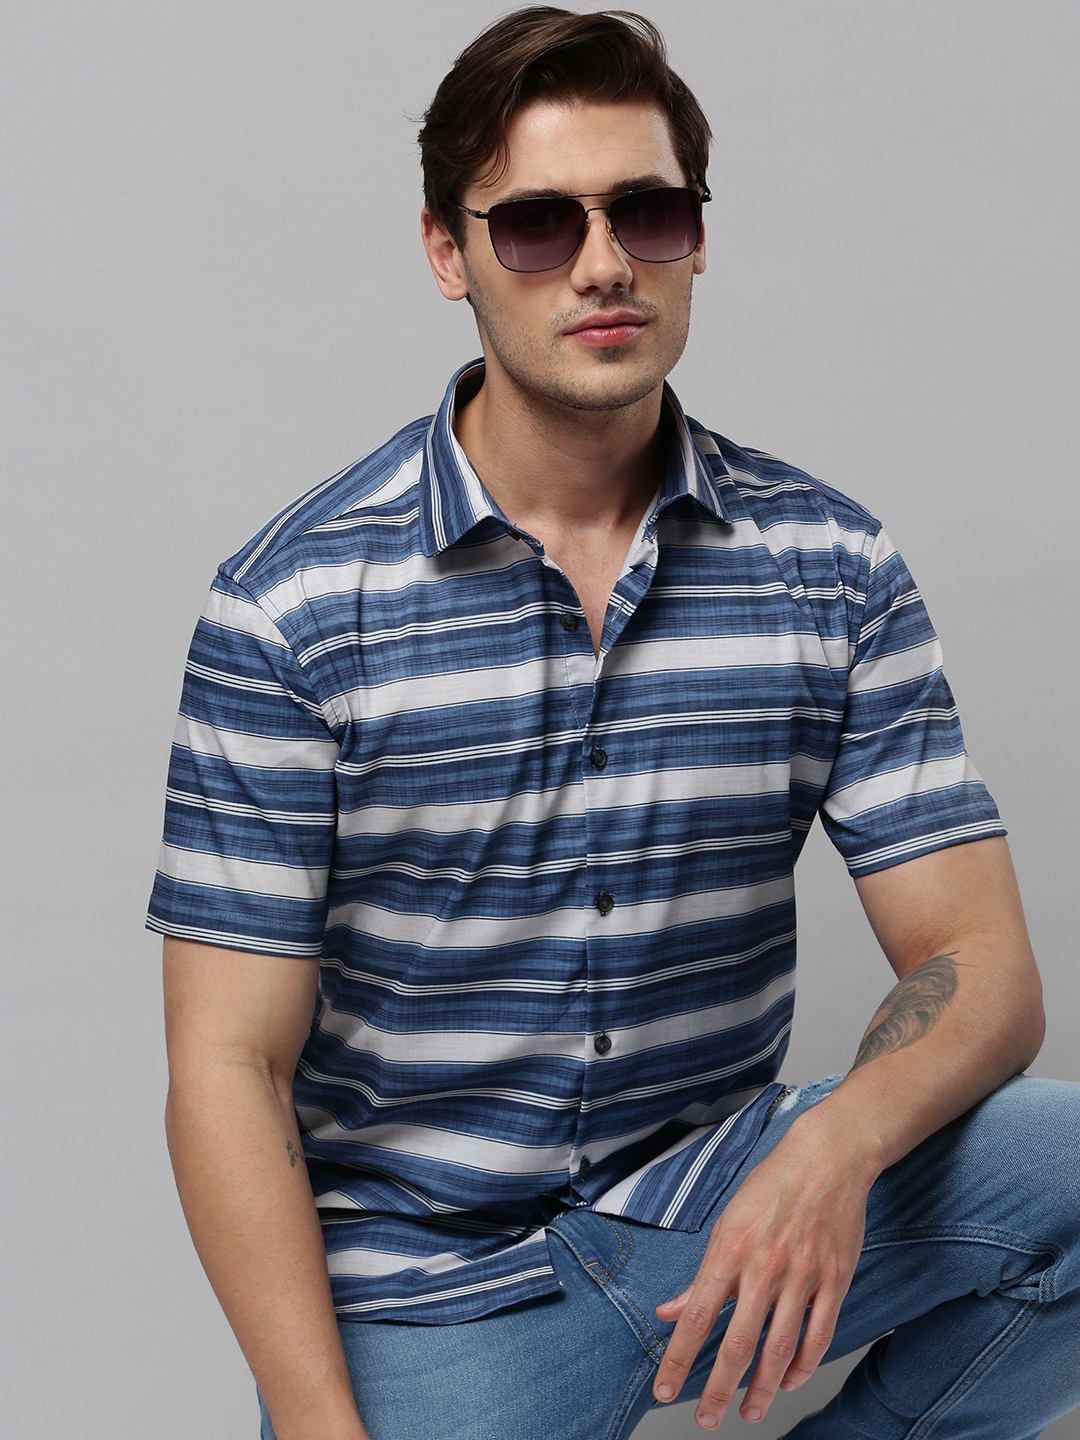 SHOWOFF Men's Spread Collar Long Sleeves Striped Blue Shirt